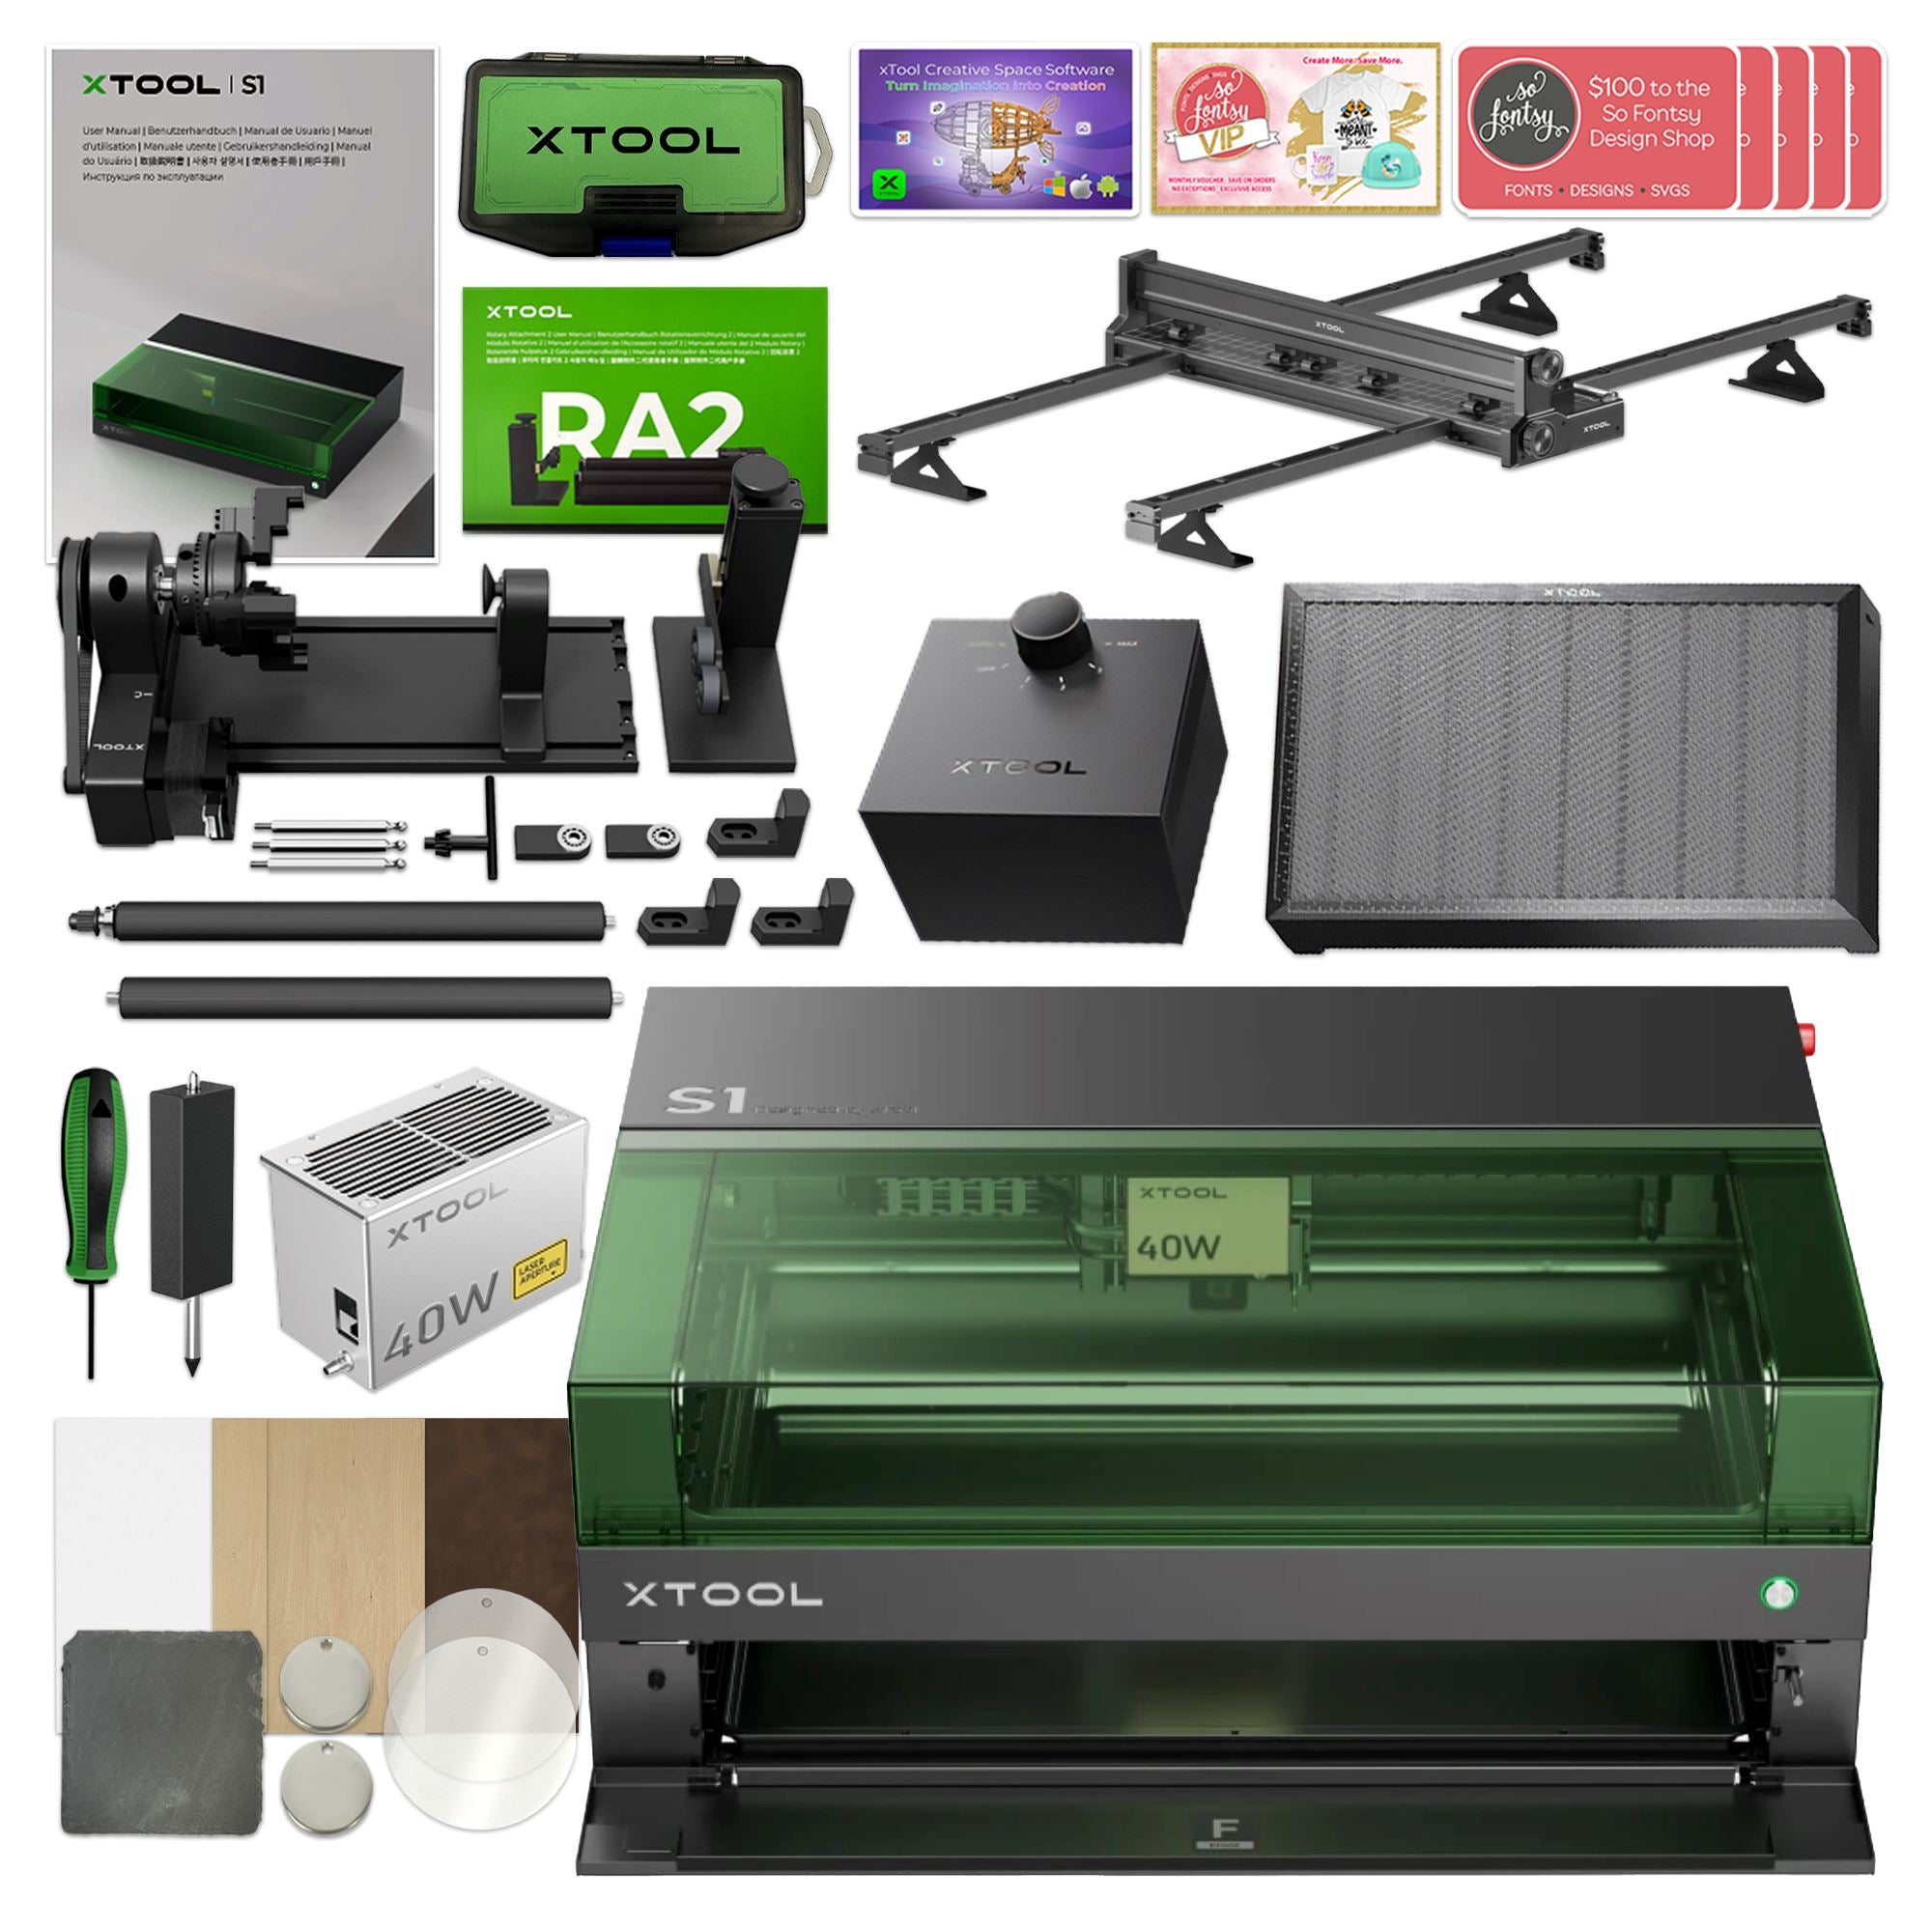 xTool S1 Laser Cutter & Engraver Machine with Deluxe Screen Printing Bundle - 40W Diode Laser +$500